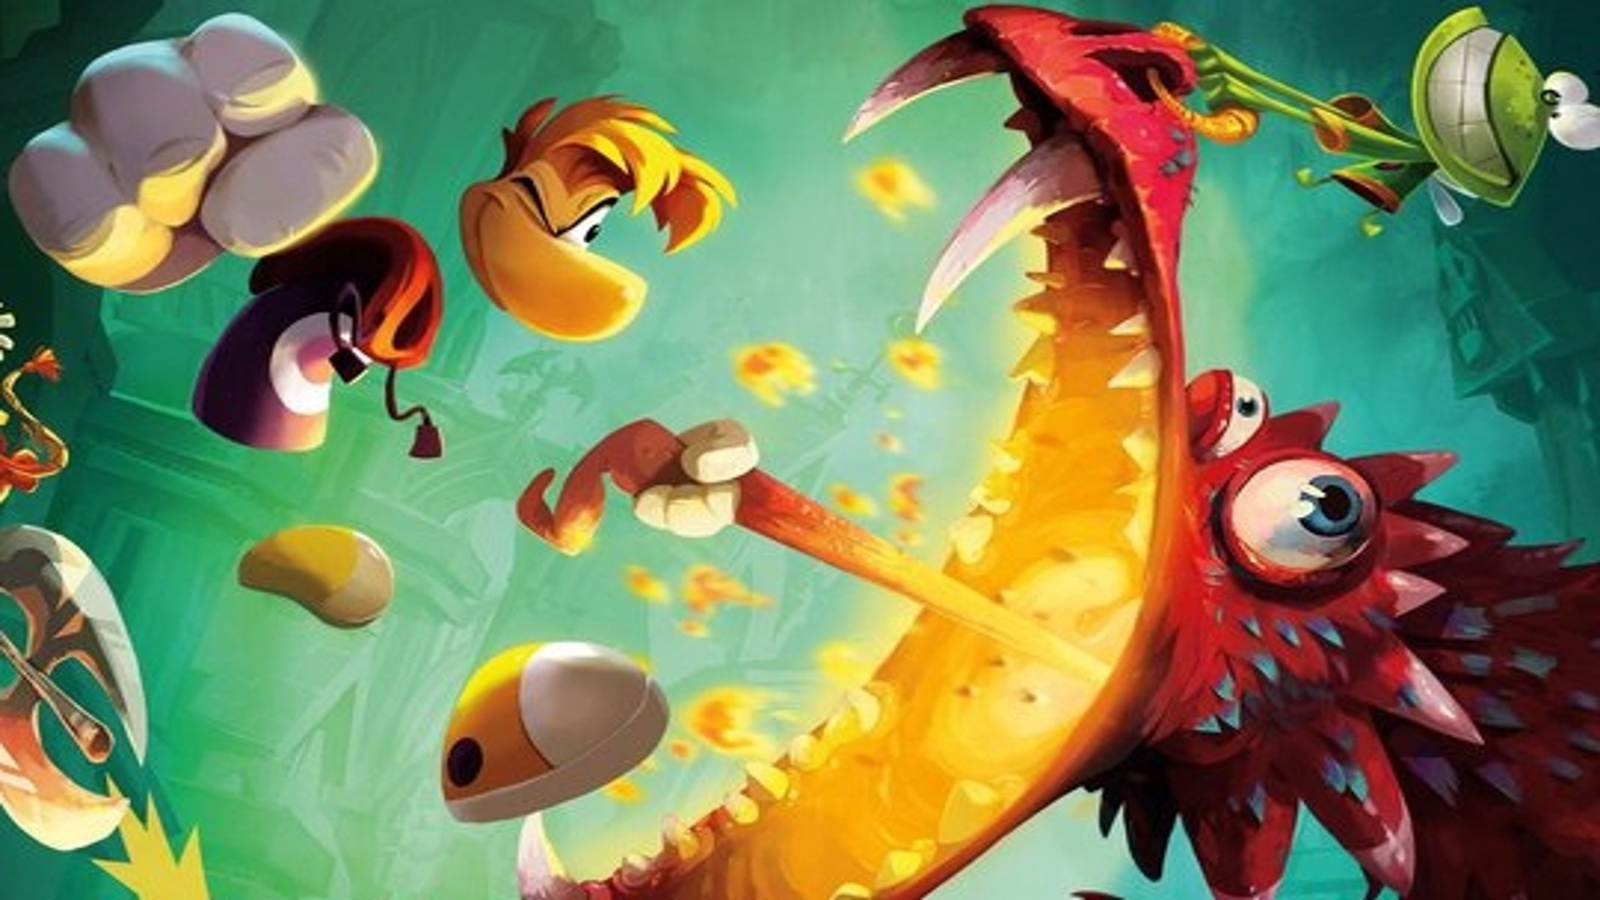 Rayman Legends' review: The game is worth the wait